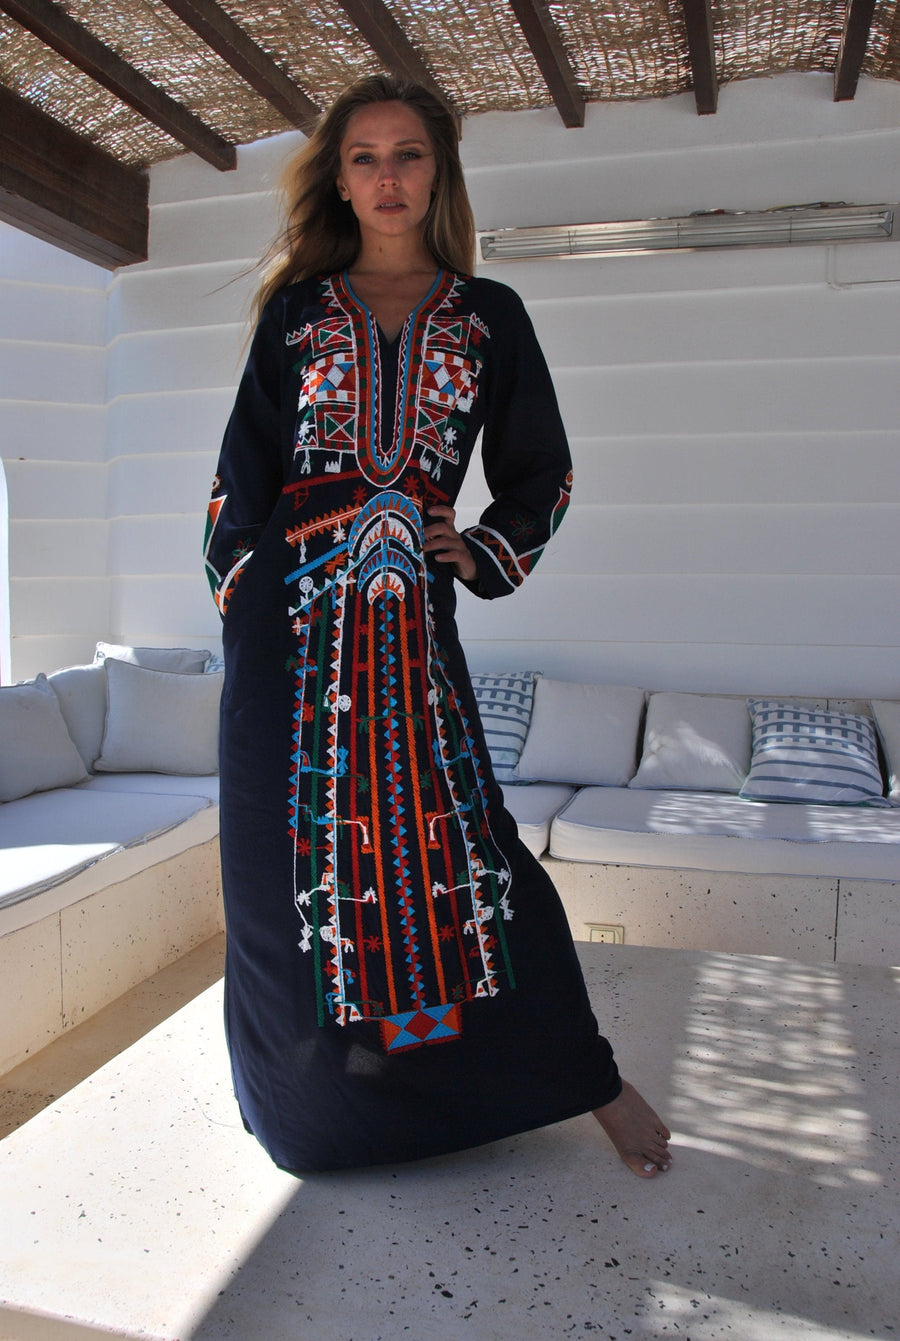 Siwa Navy Blue embroidered cotton Caftan with pocket, Kaftan maxi, embroidered Caftan dress, Caftan maxi dress, Caftans for women, Caftan